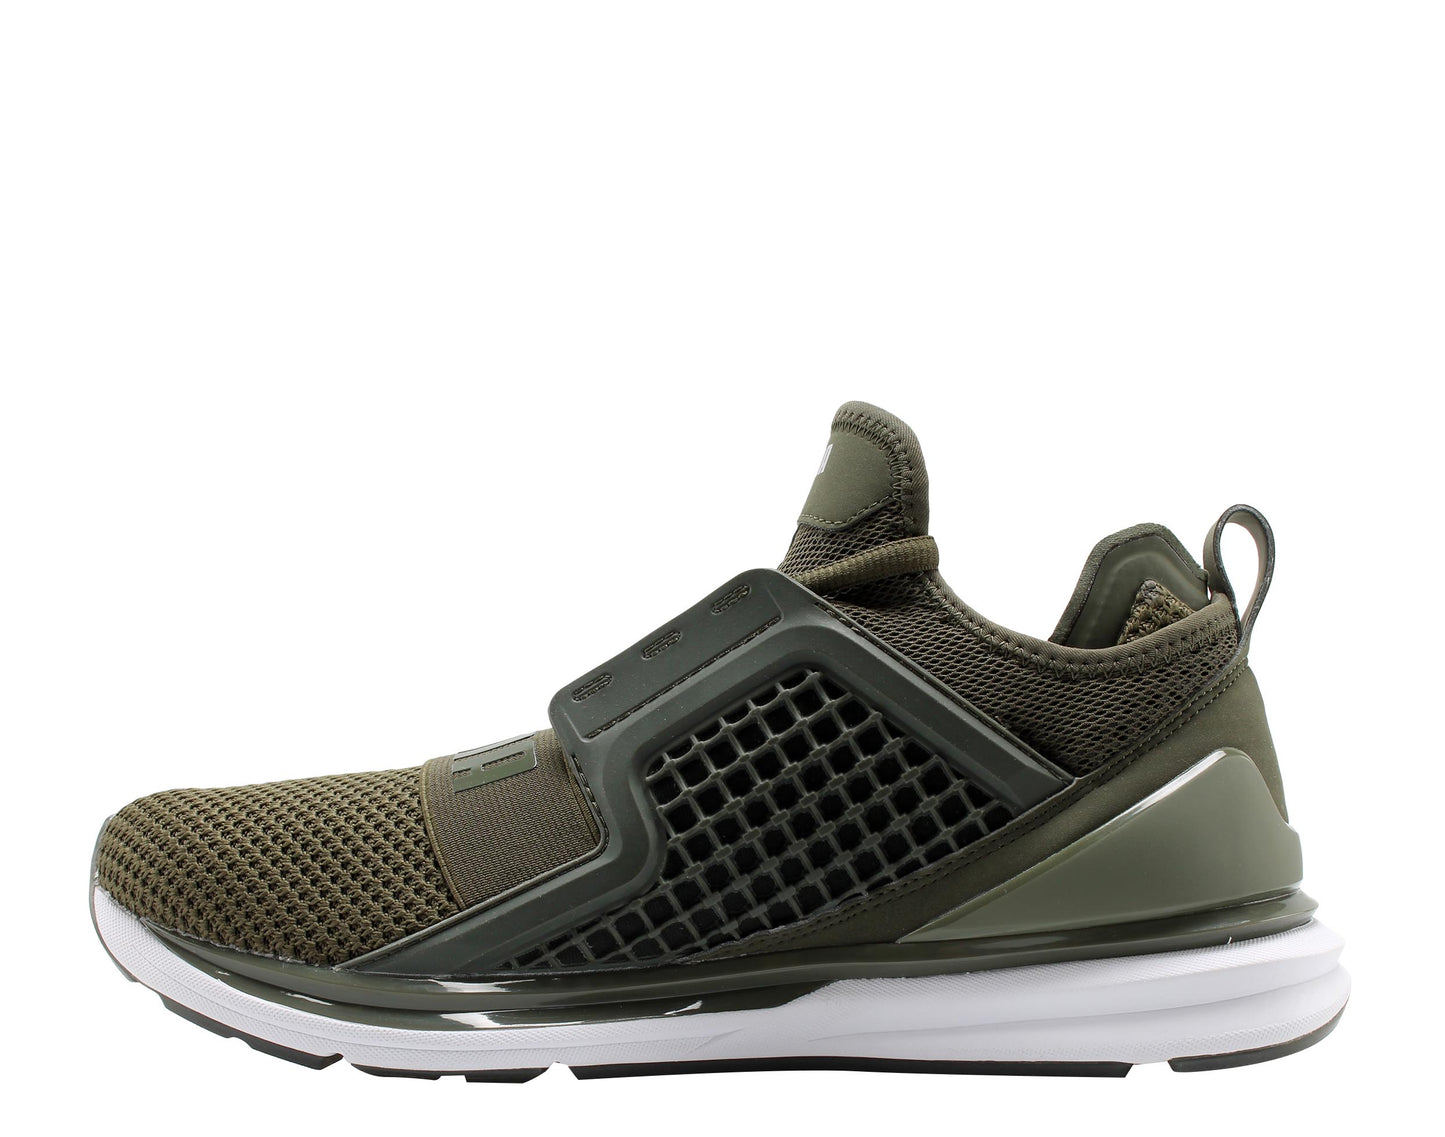 Puma IGNITE Limitless Weave Men's Running Shoes